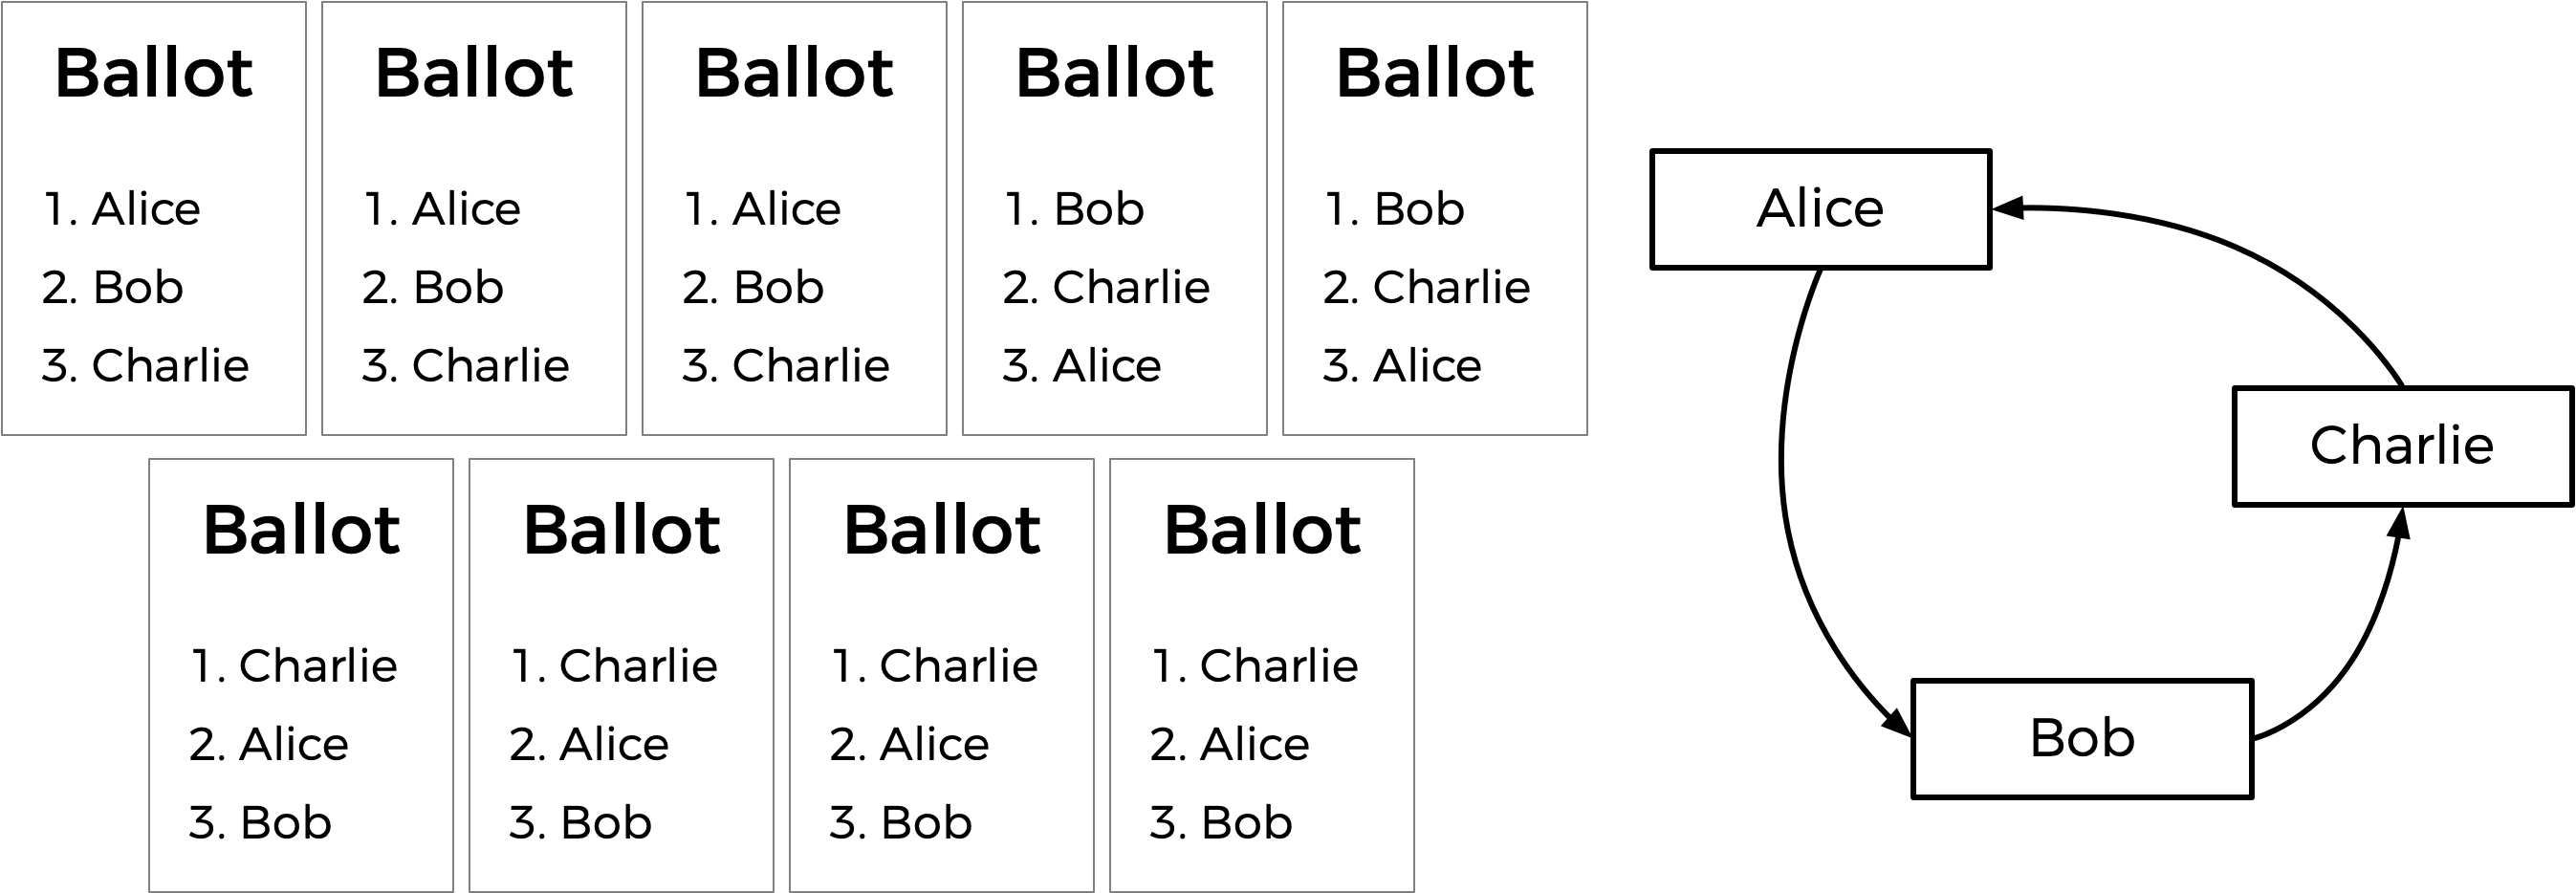 Nine ballots, with ranked preferences